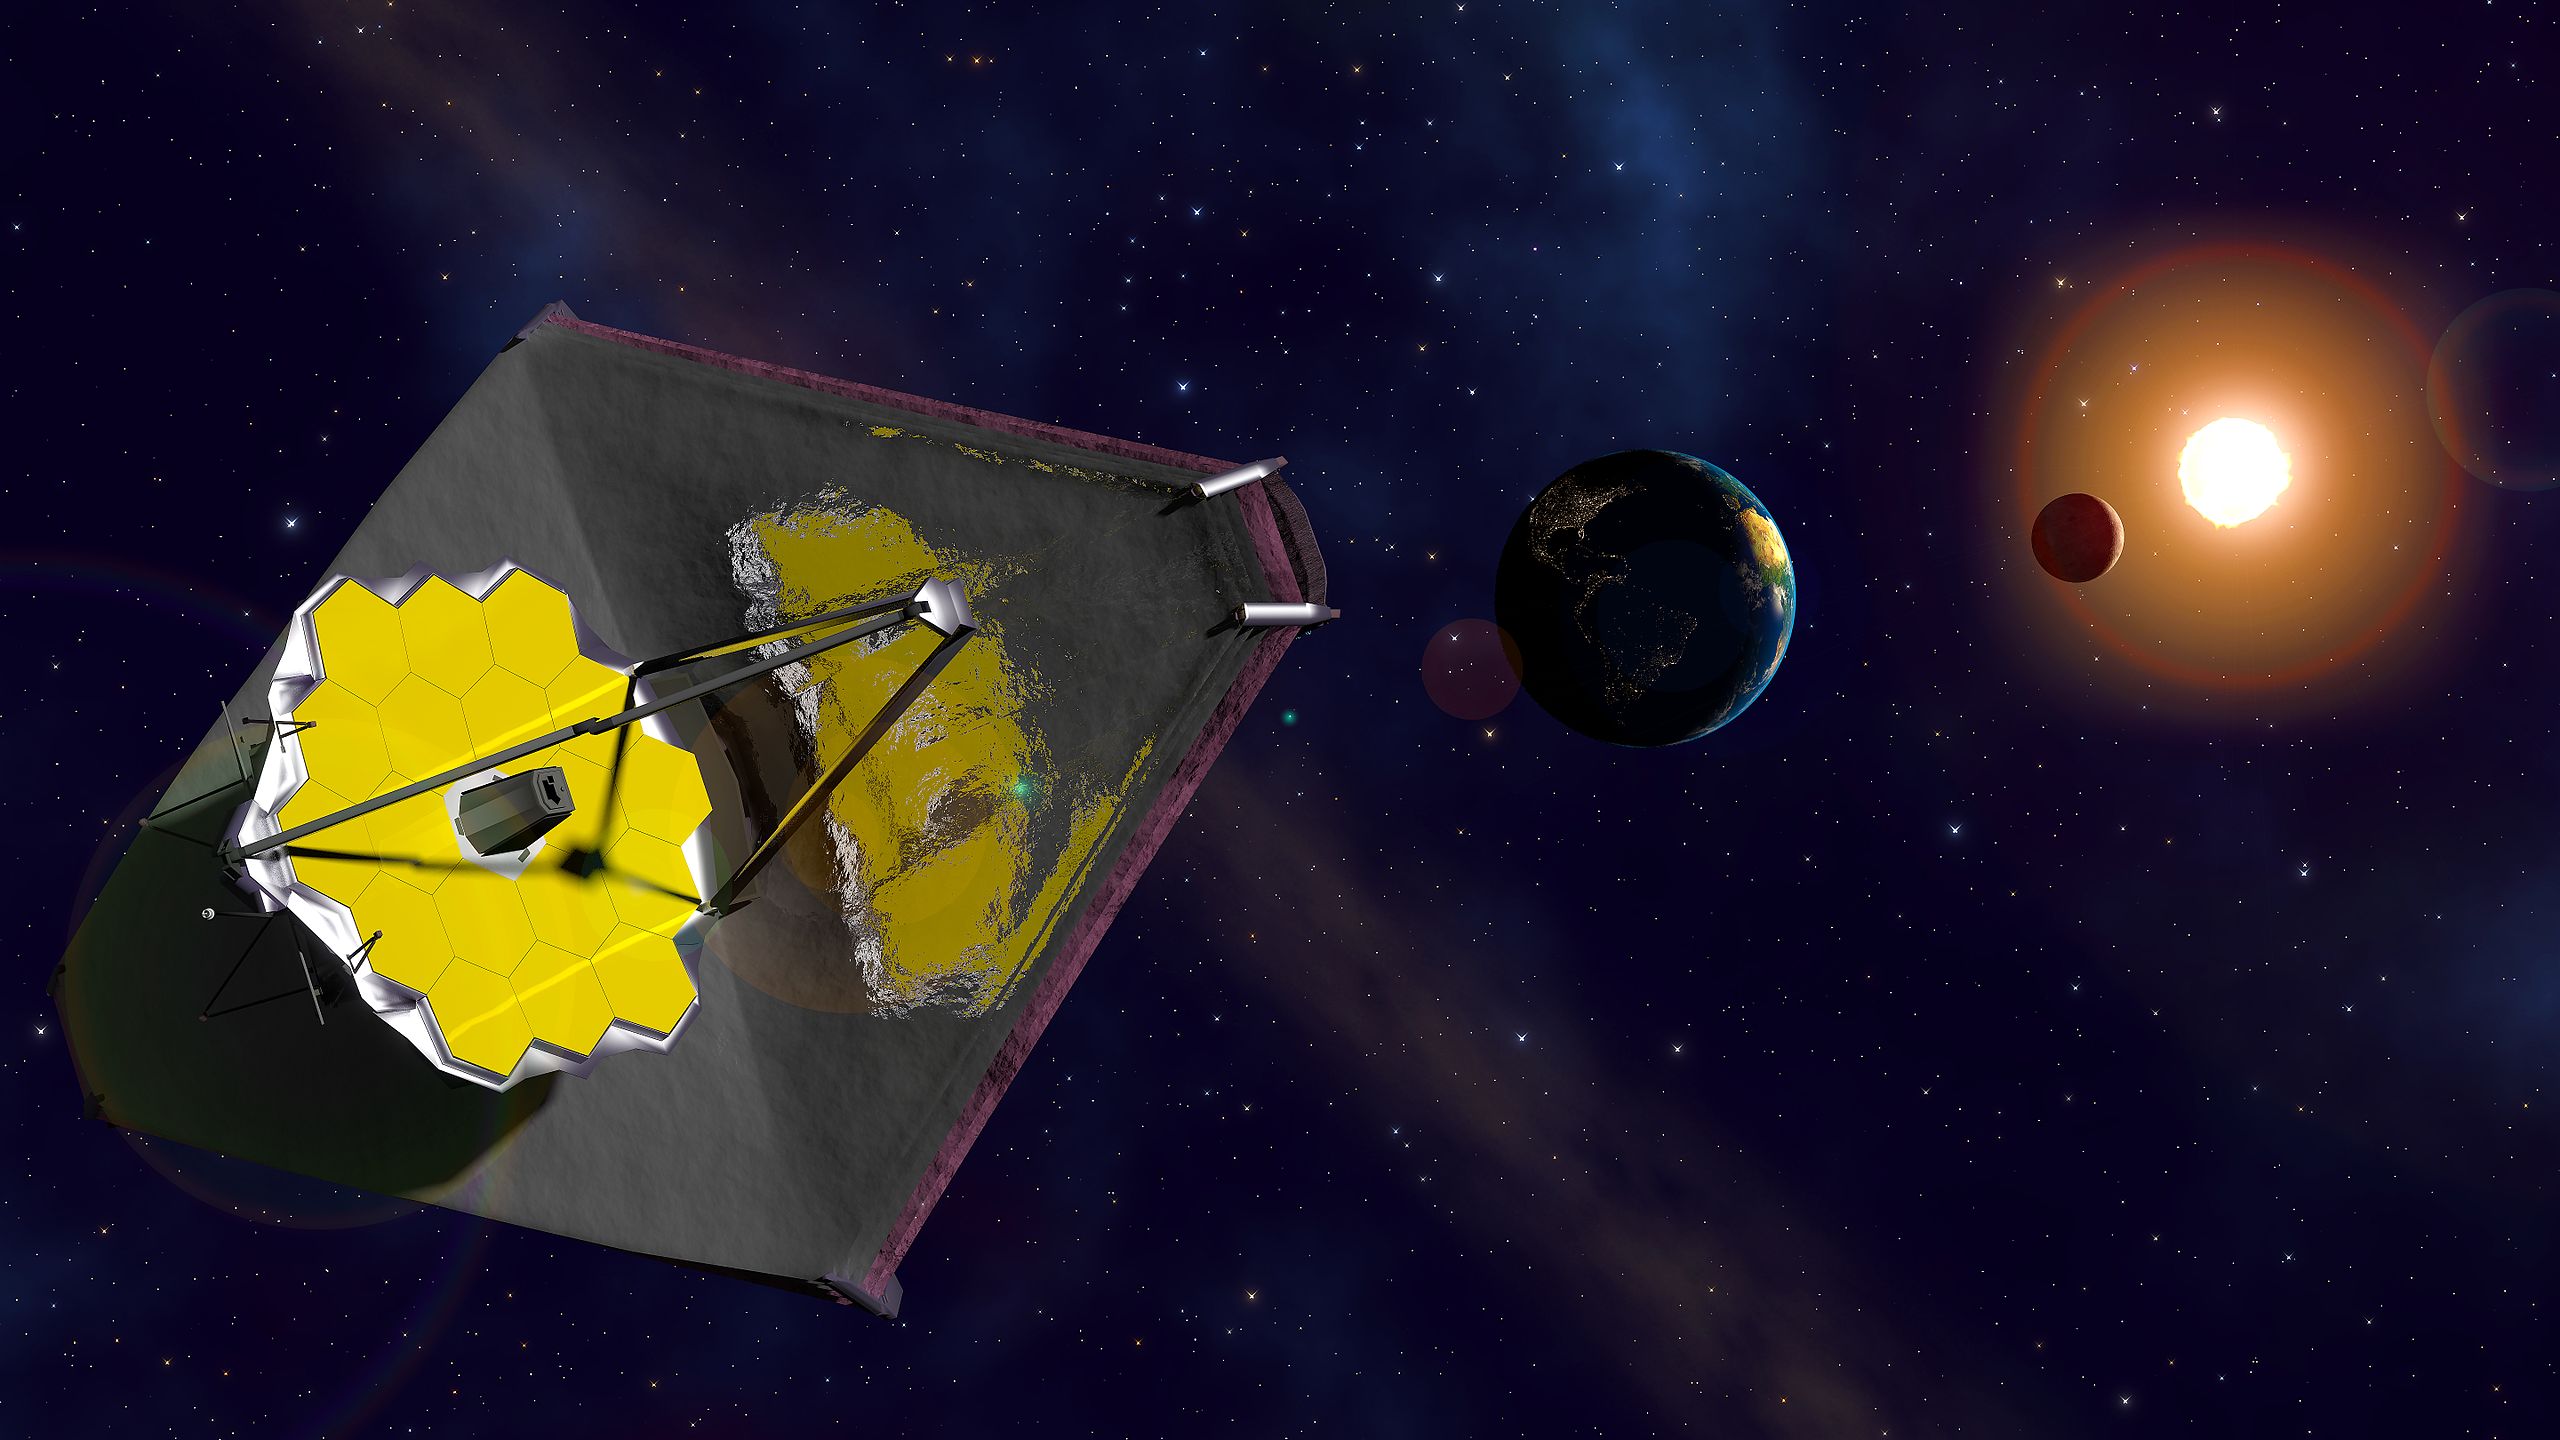 James Webb Space Telescope will release its 1st science-quality images July 12 thumbnail